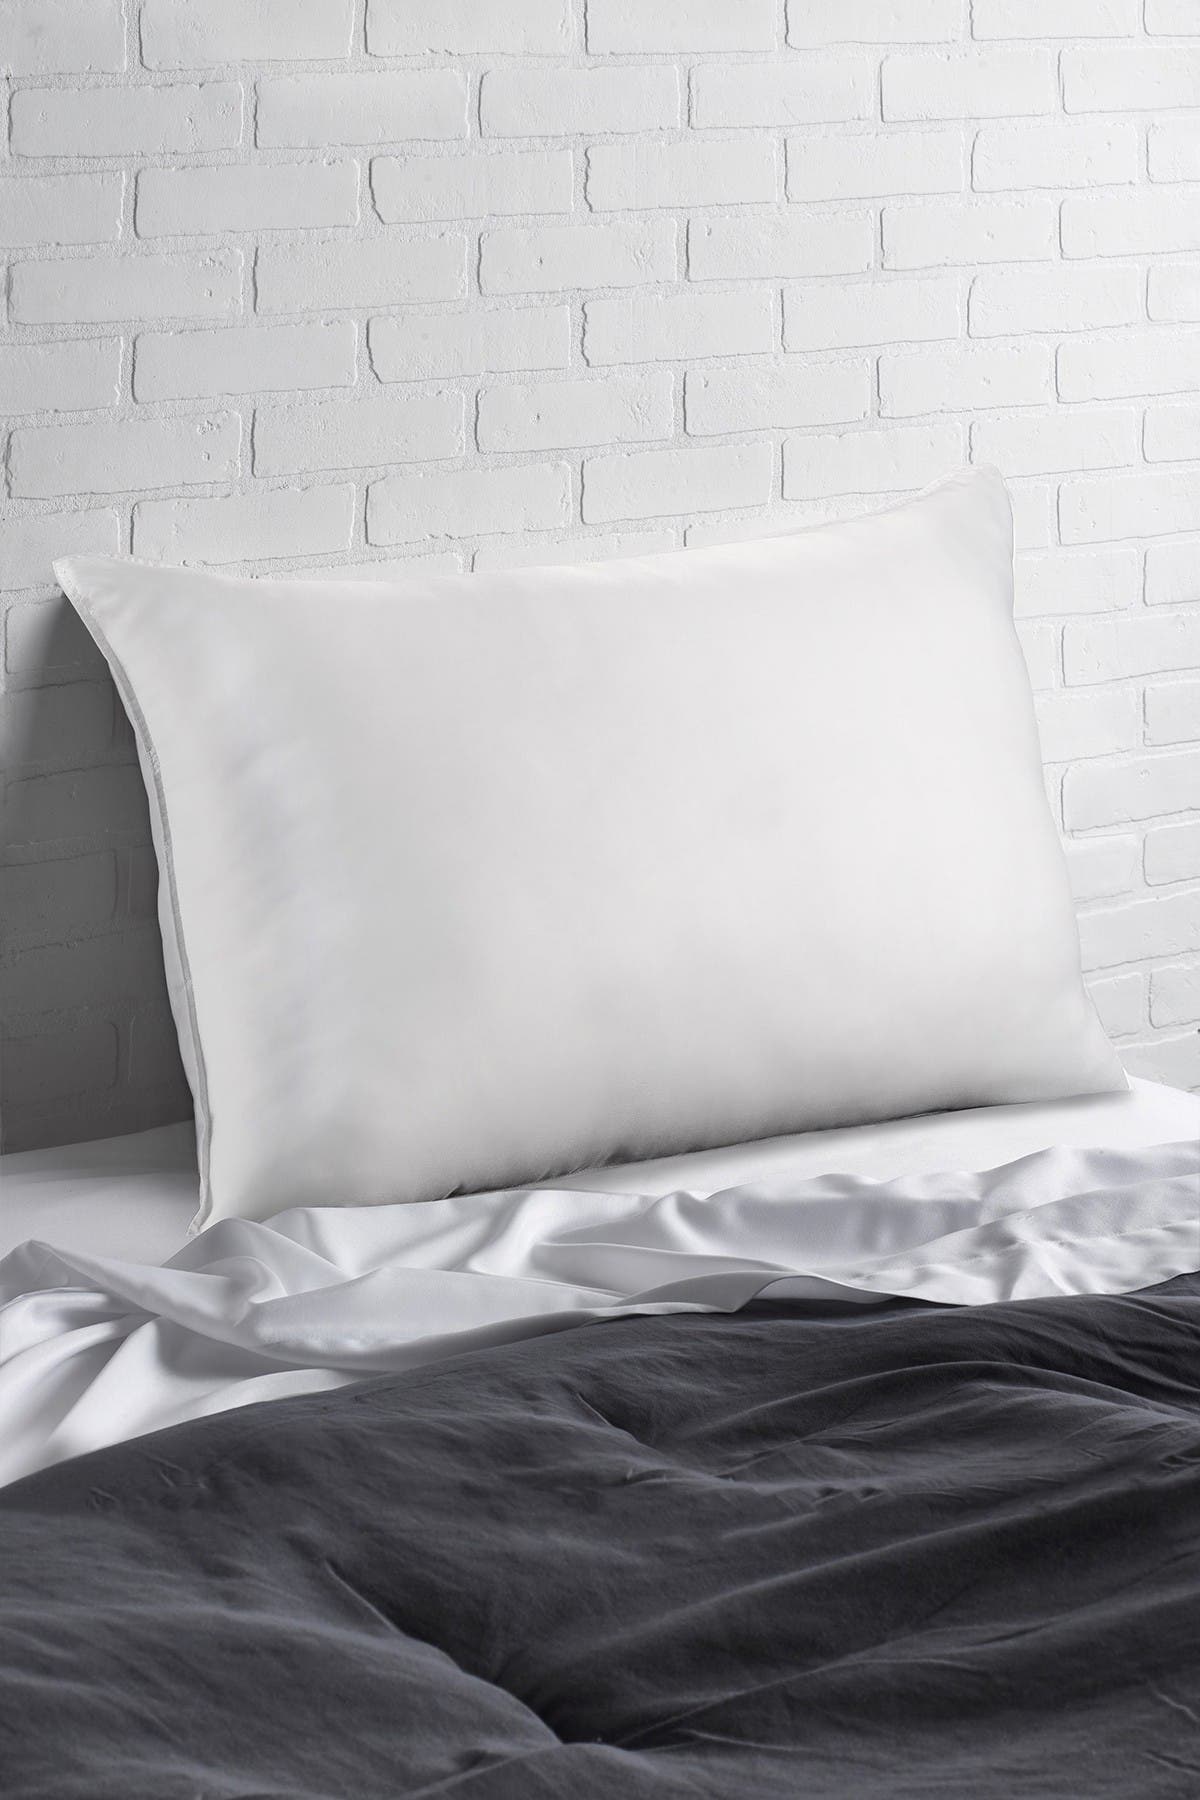 king size pillows for stomach sleepers